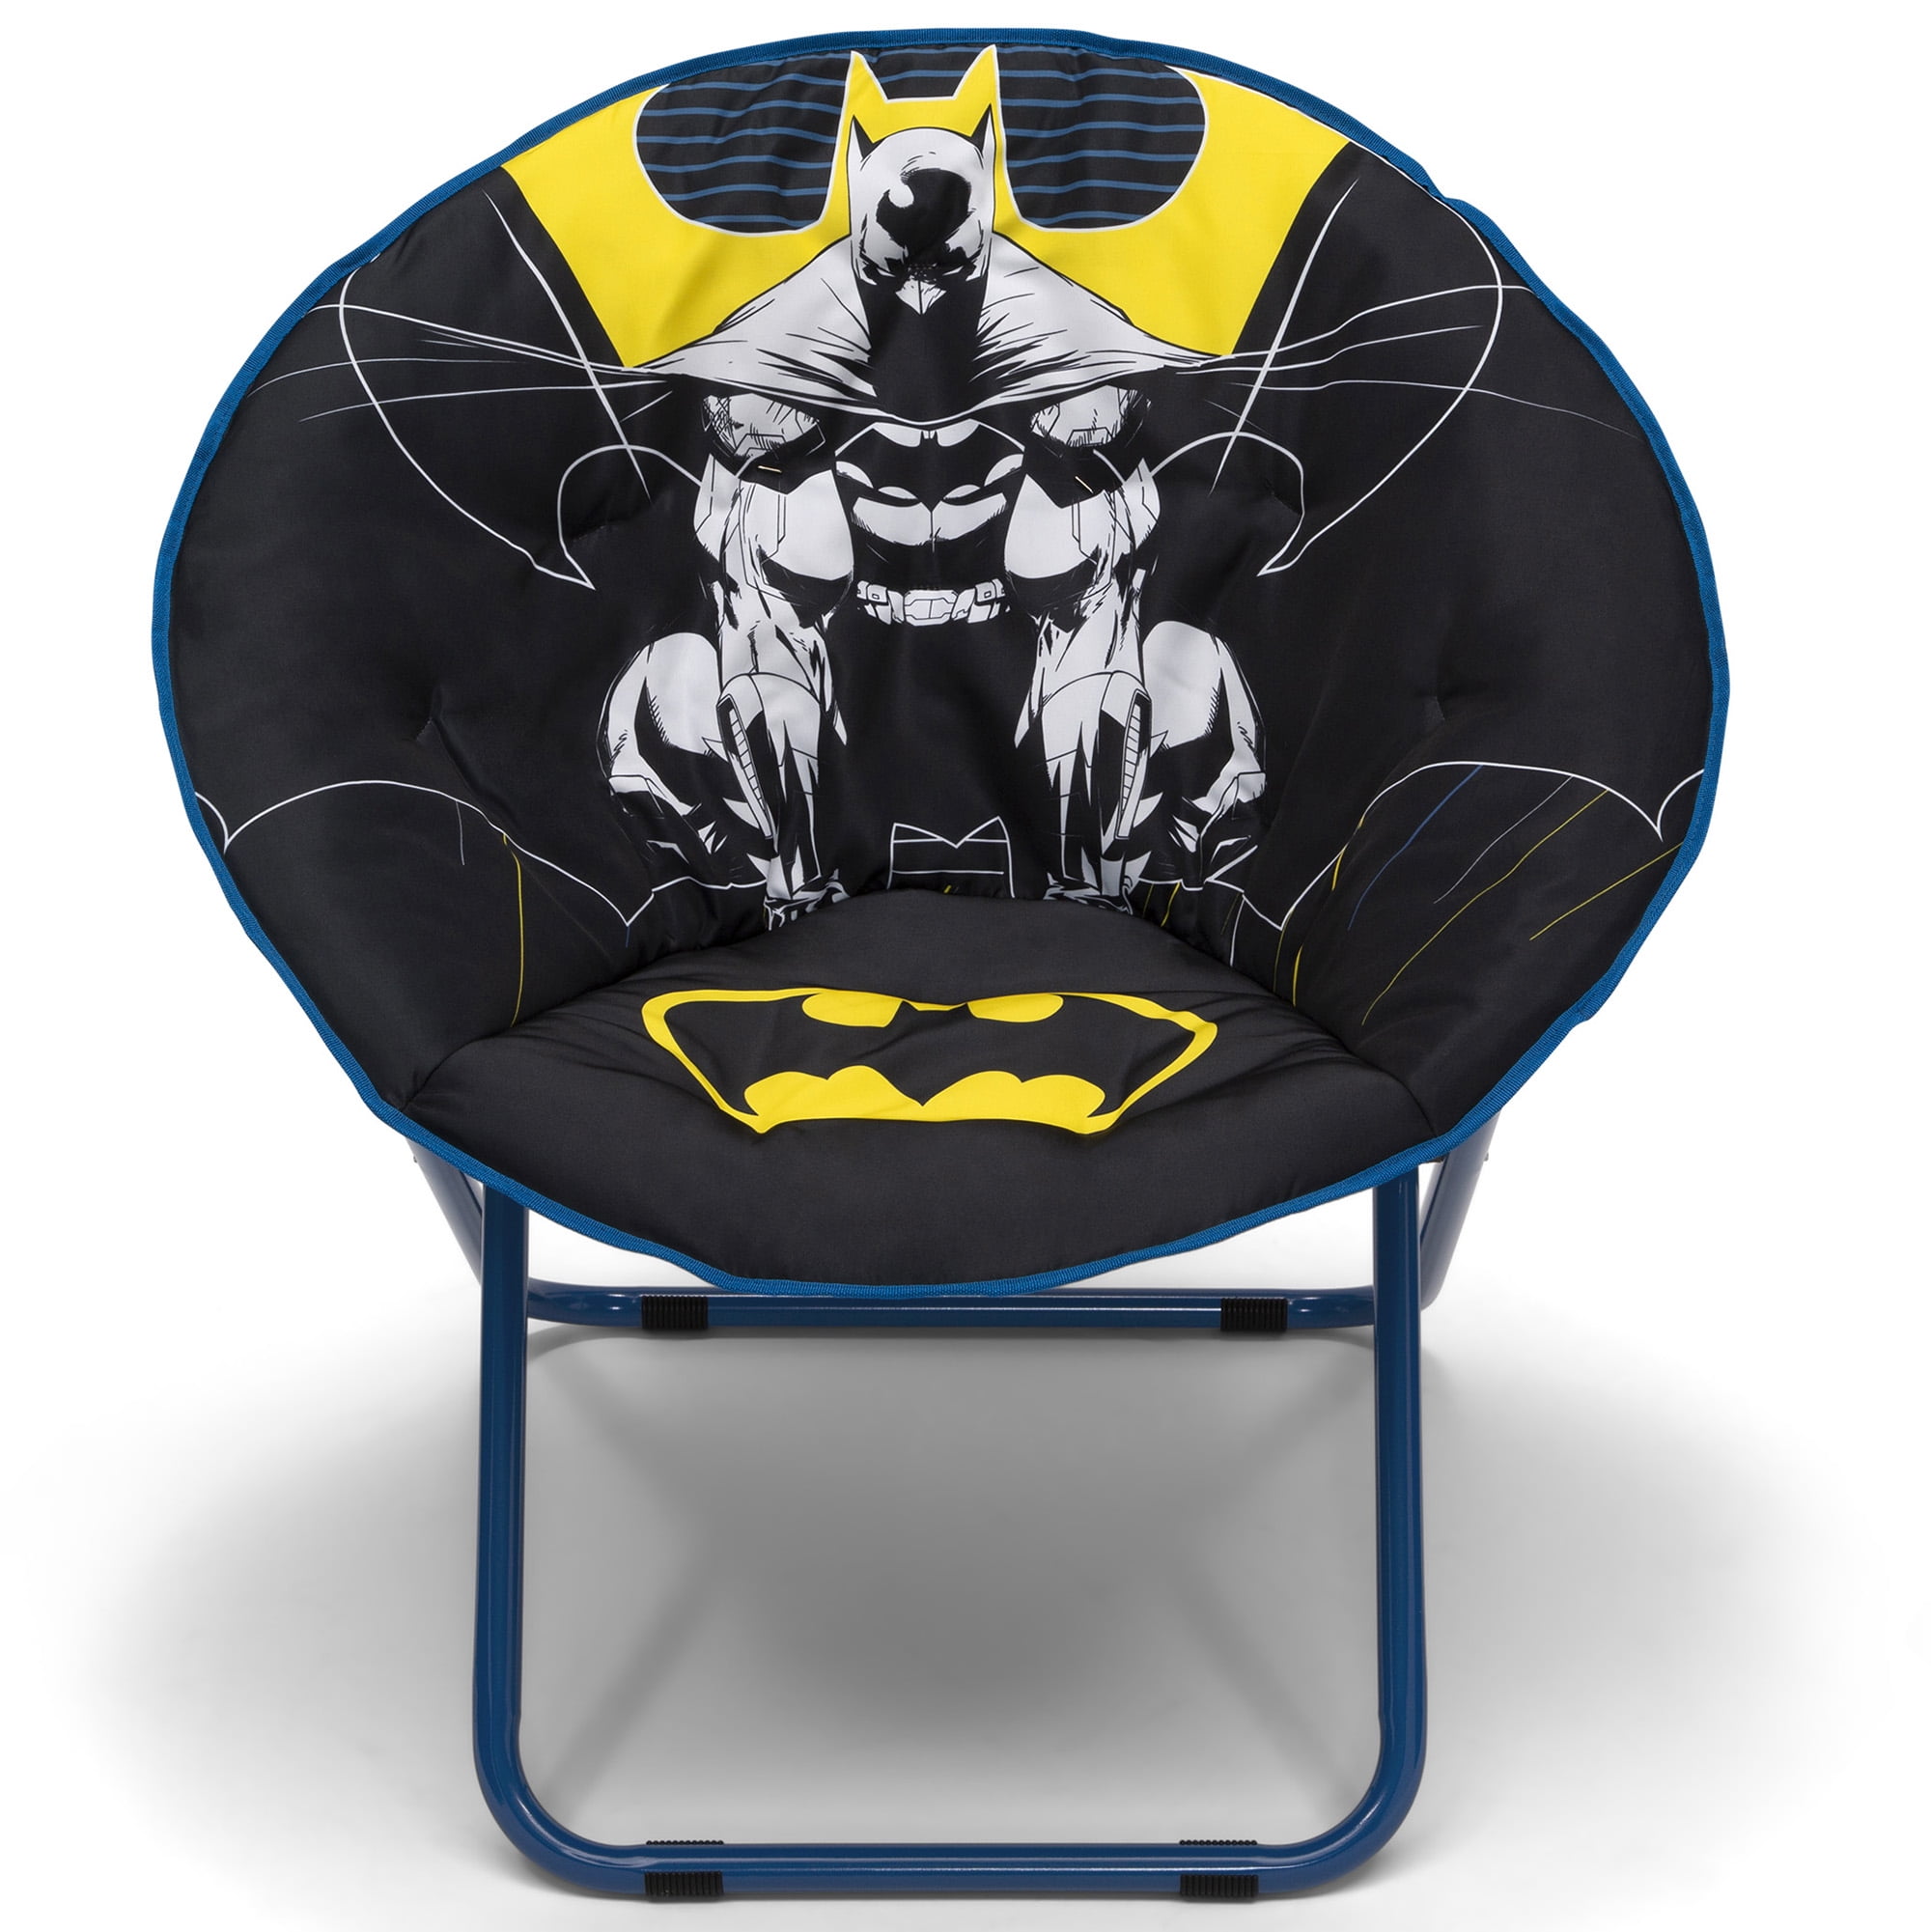 Batman Saucer Chair for Kids/Teens/Young Adults by Delta Children -  